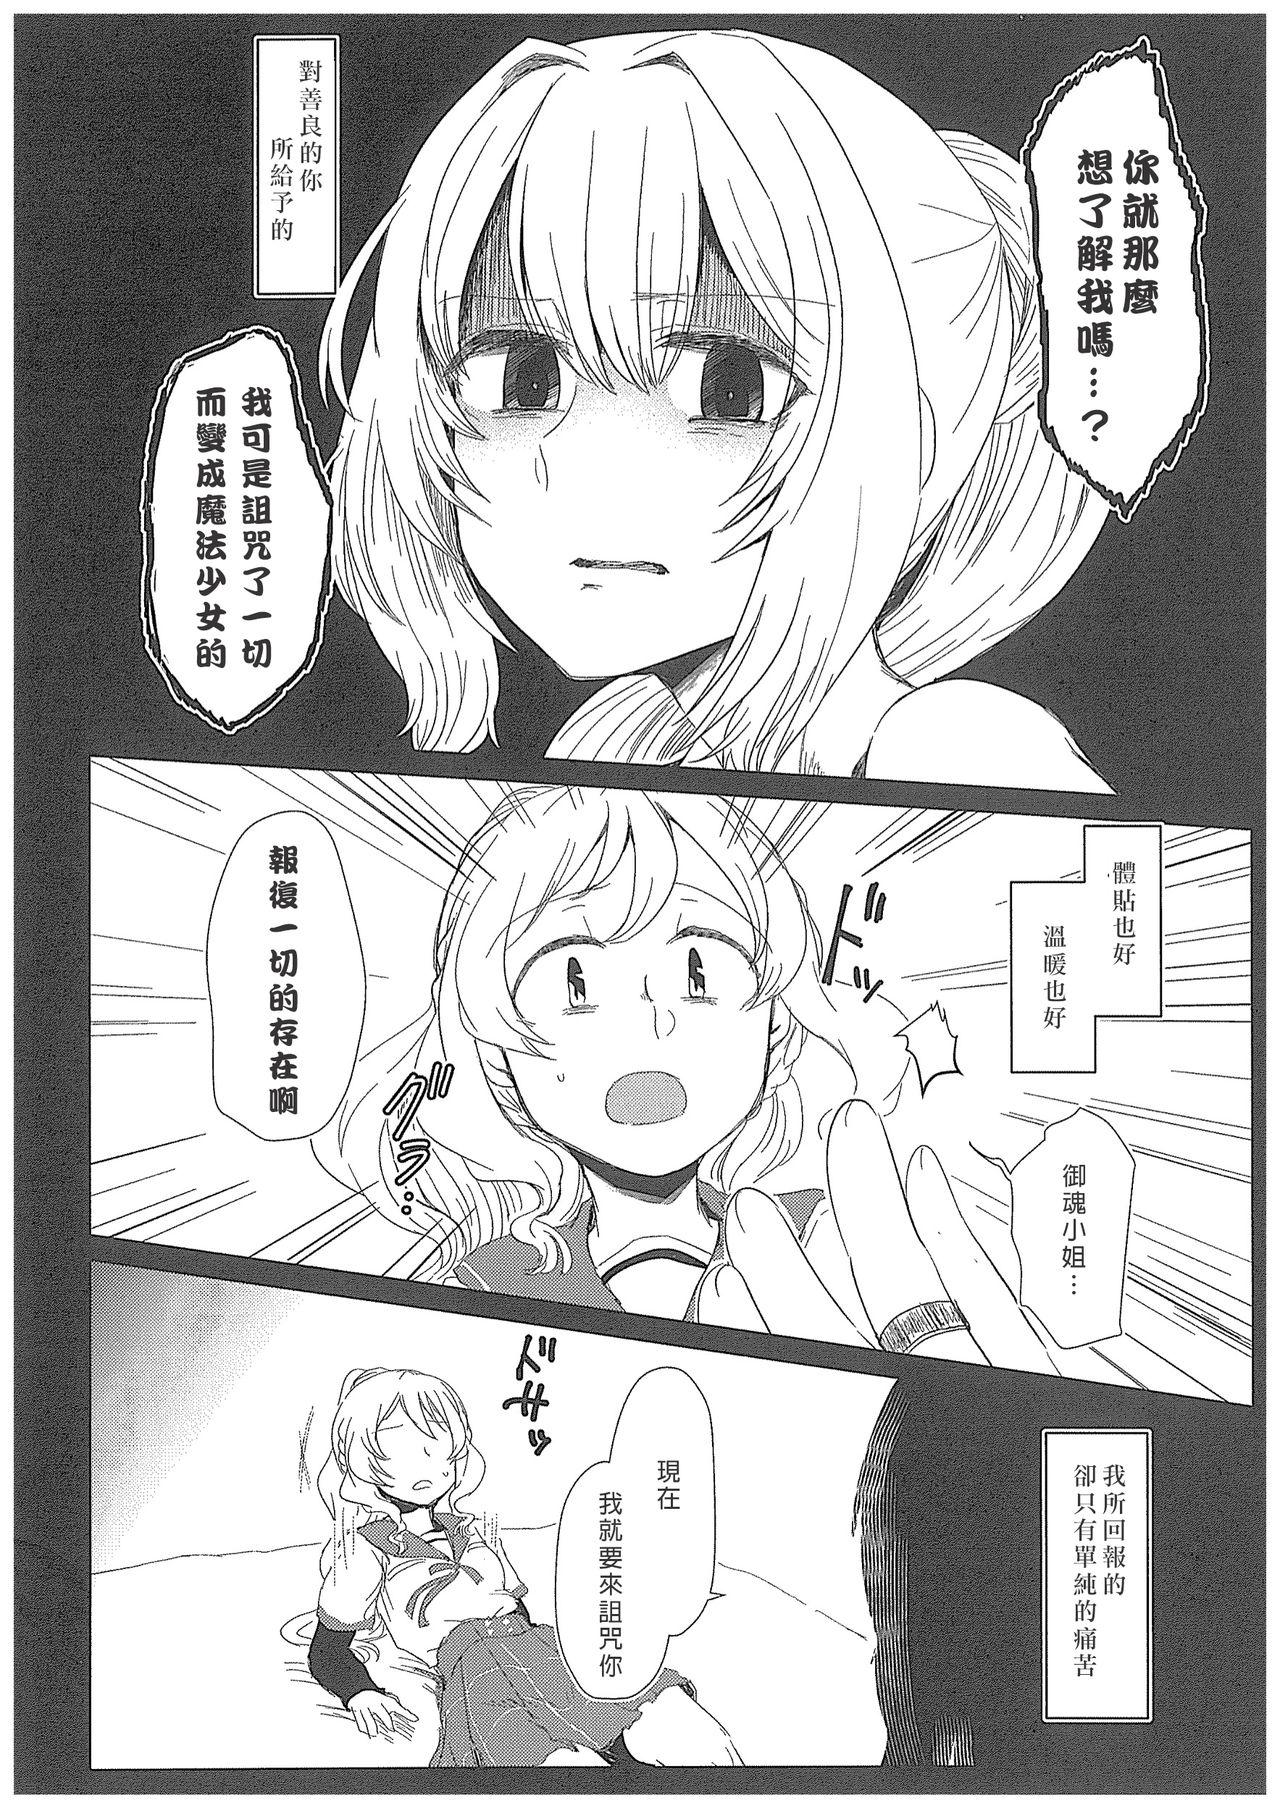 Tight Cunt From nothing,nothing comes|漢堡牛排不能無中生有 - Puella magi madoka magica side story magia record Turkish - Page 11